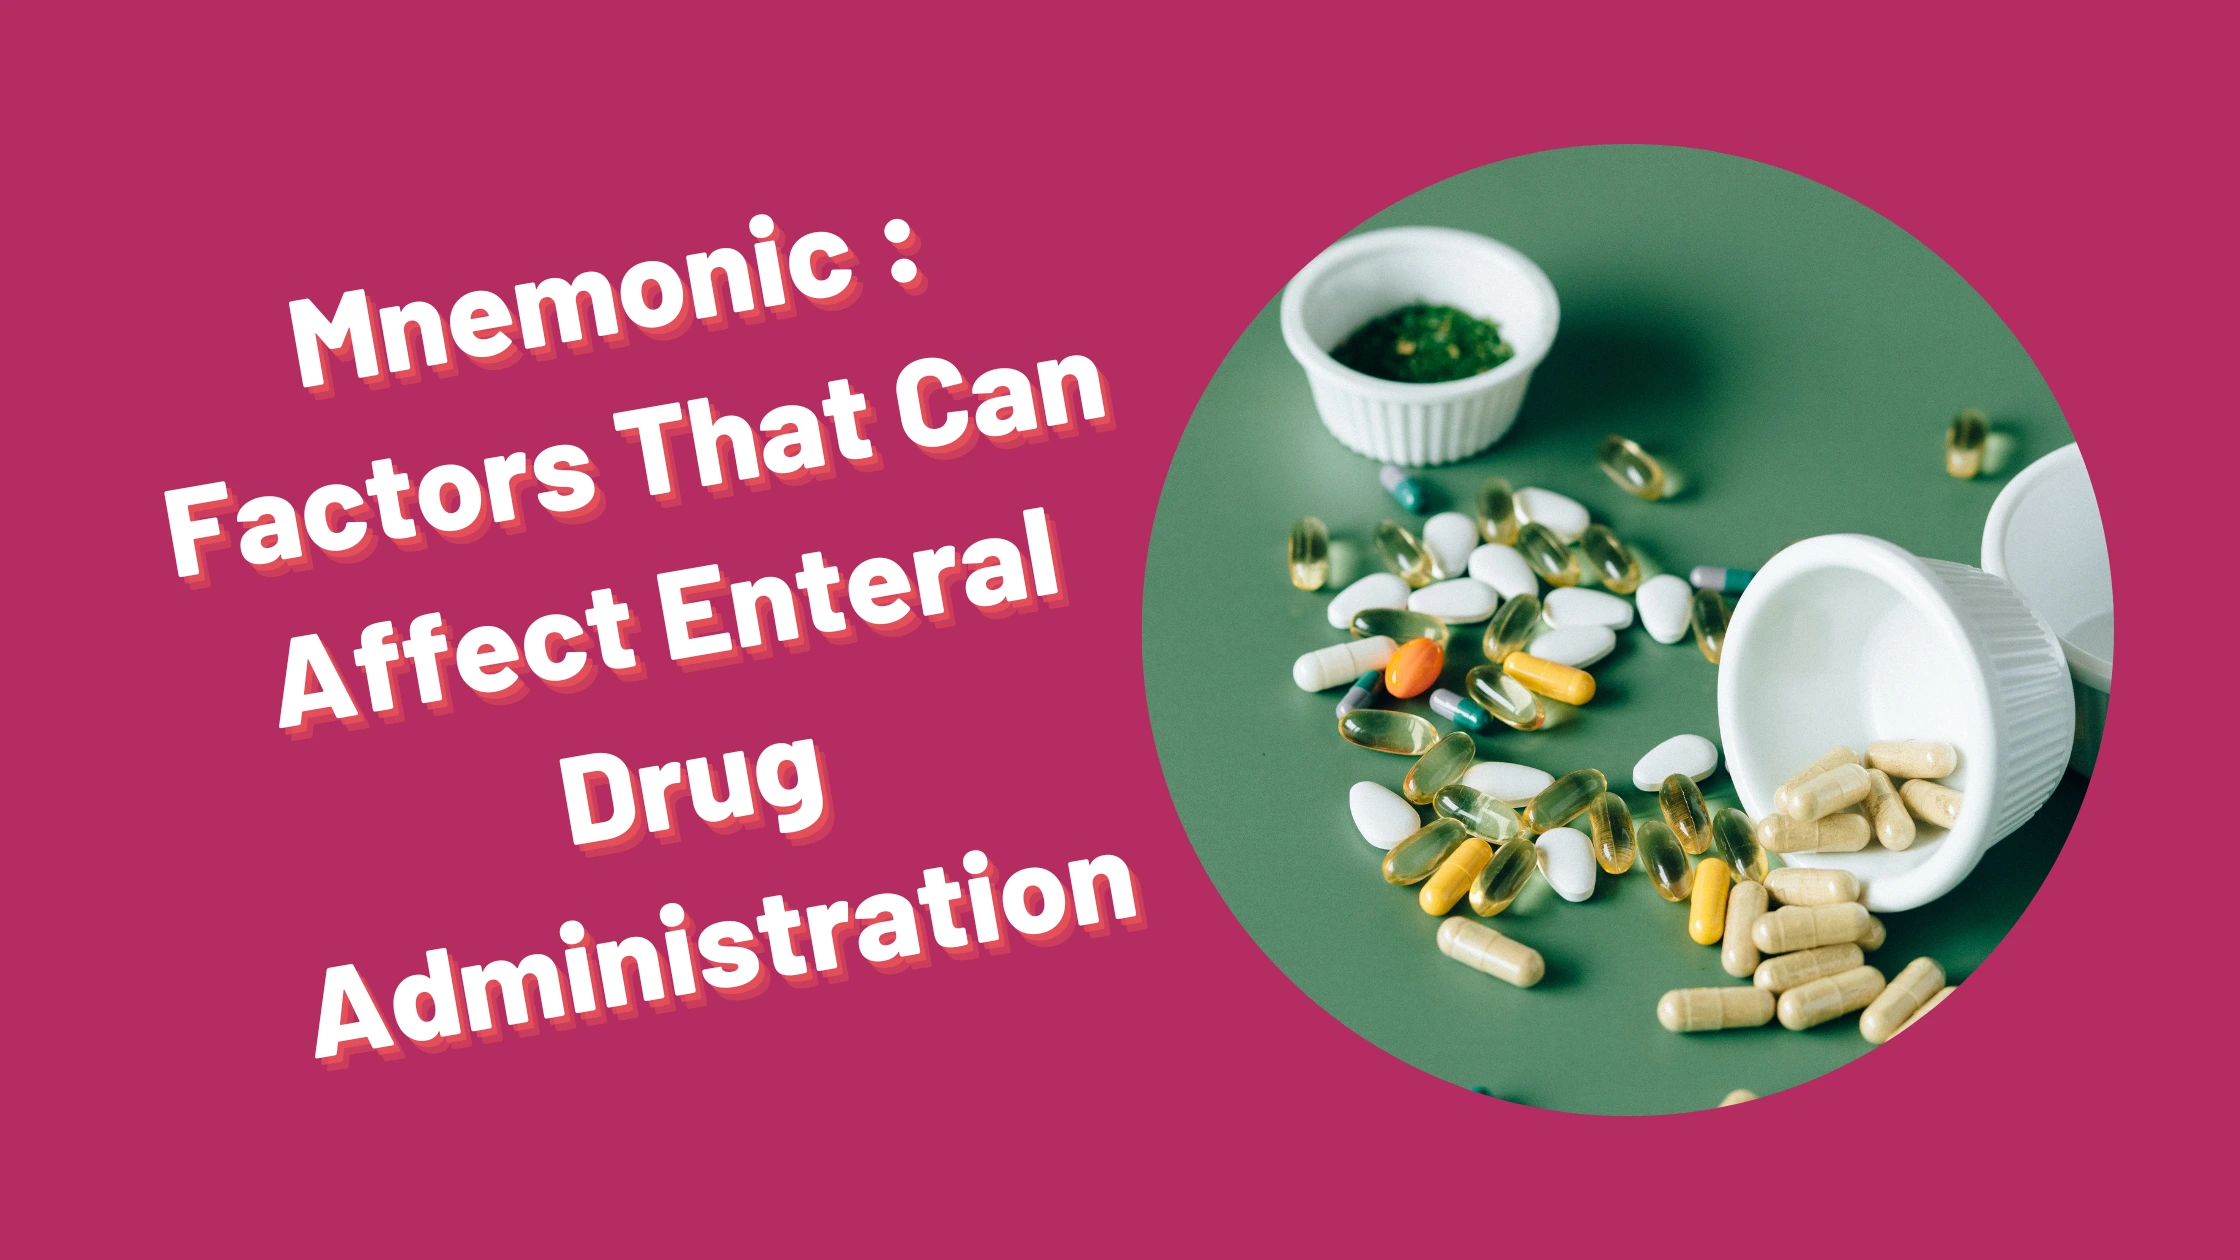 You are currently viewing [Very Cool] Mnemonic : Factors That Can Affect Enteral Drug Administration